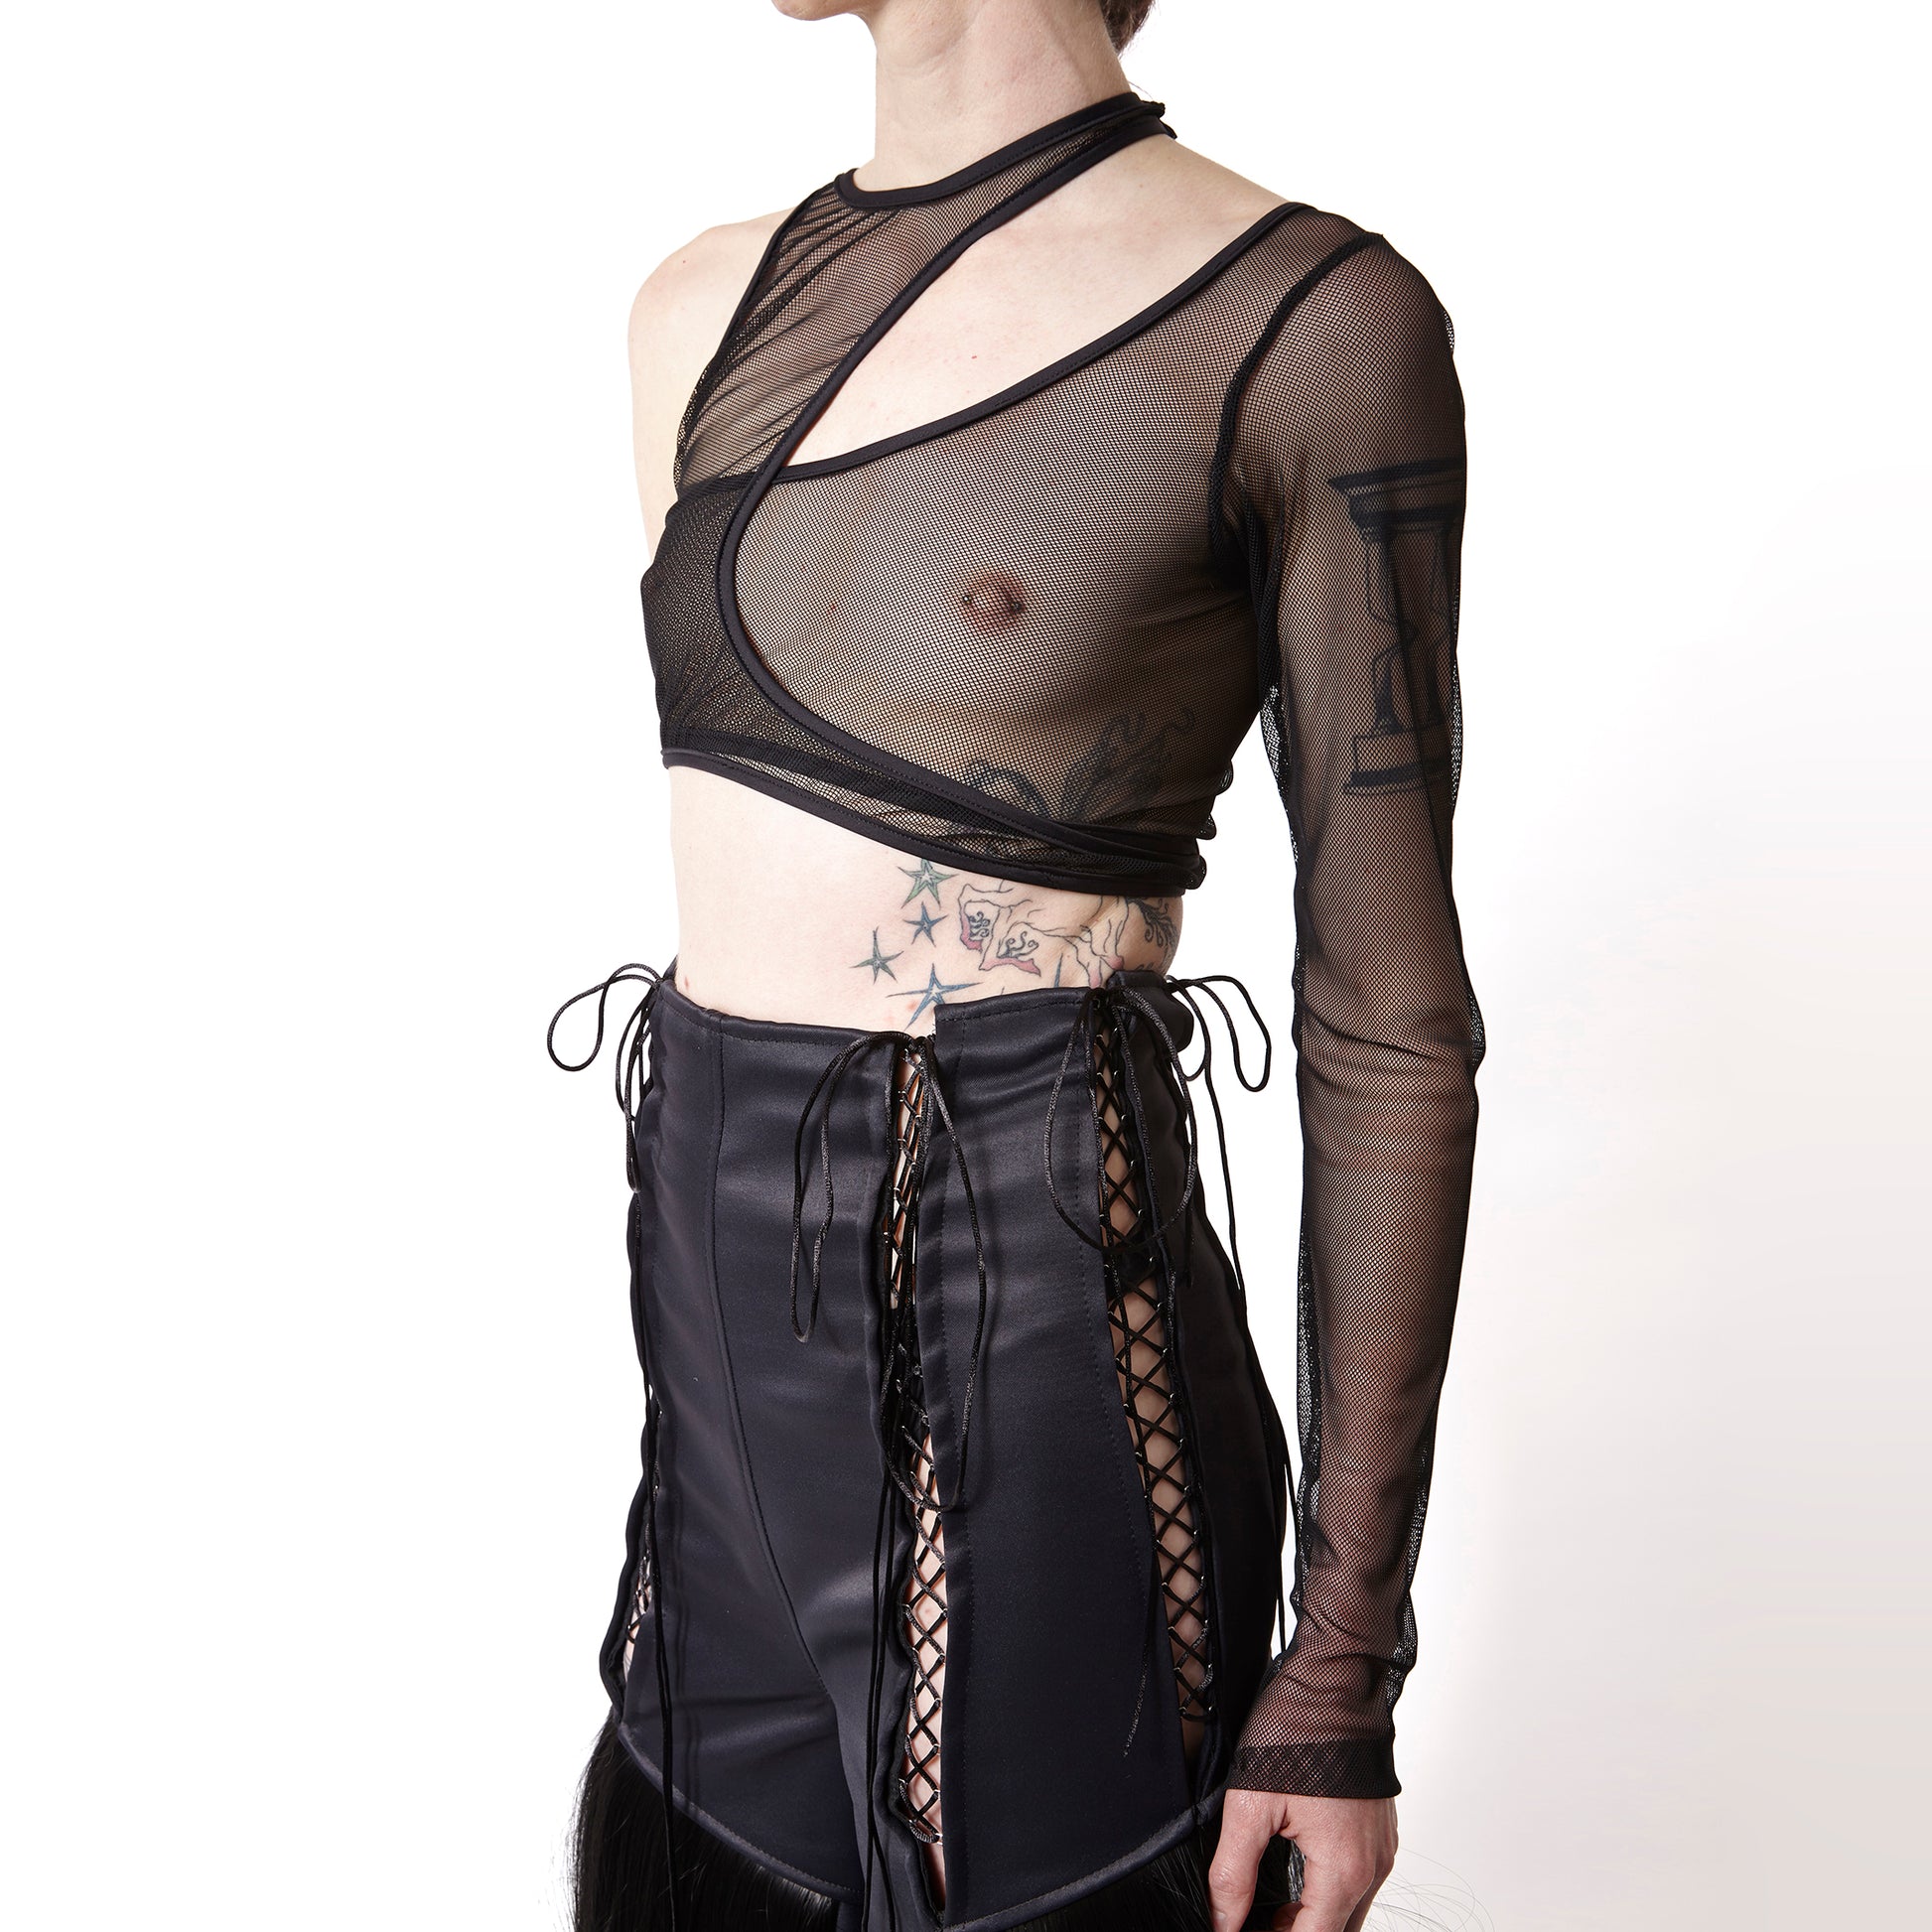 black outfit, queer, corset pants, club wear. Top mesh asimetric club wear ASYMMETRICAL MESH TOP is created with lightweight and breathable mesh fabric